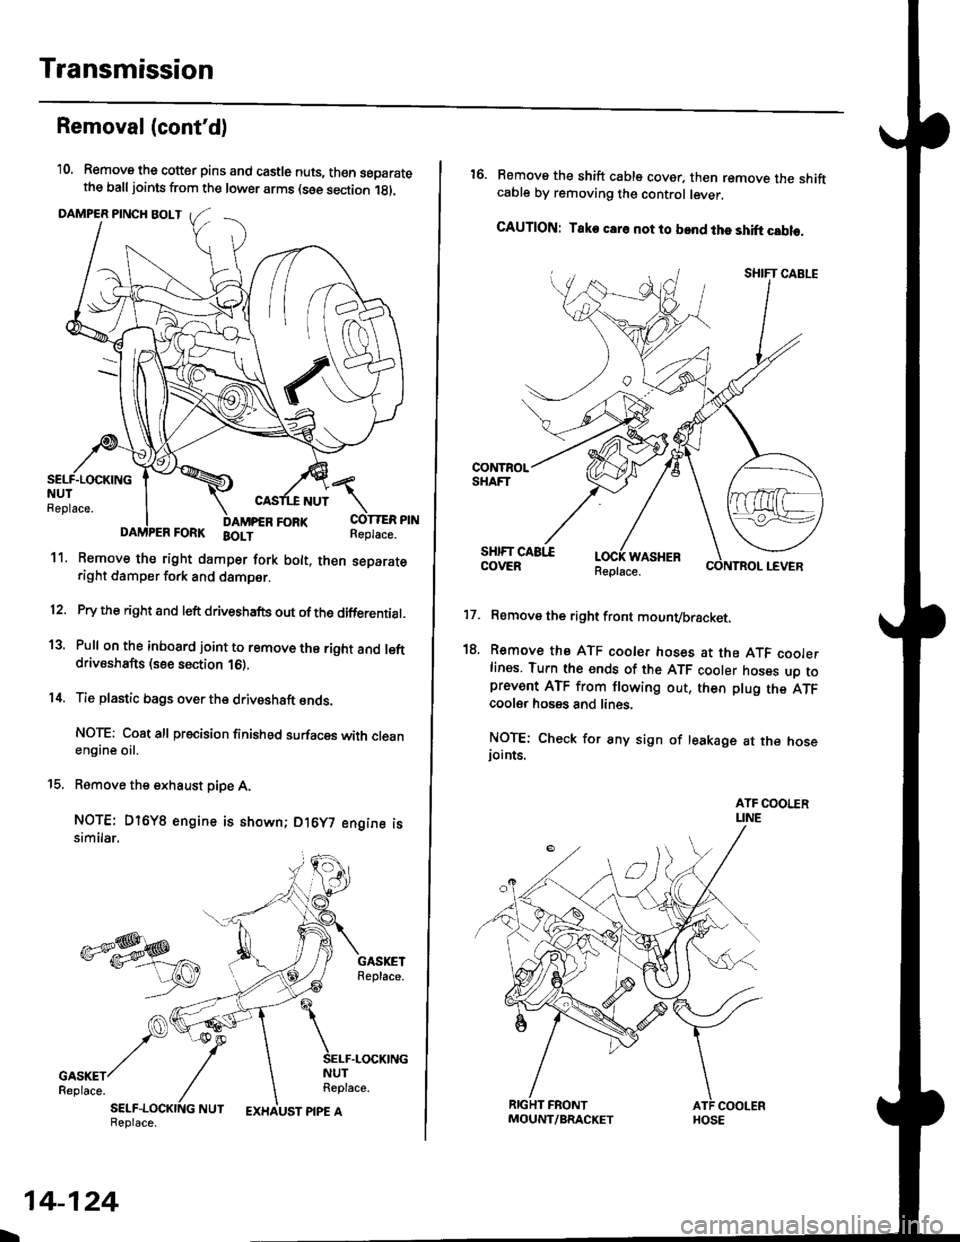 HONDA CIVIC 1997 6.G Workshop Manual Transmission
Removal(contd)
10. Remove the cotter pins and castle nuts, th€n separatethe balljoints from the lower arms (see section 1gl.
DAMPER PINCH BOLT
NUT
FORI(FORK BOLT
11. Remove the right 